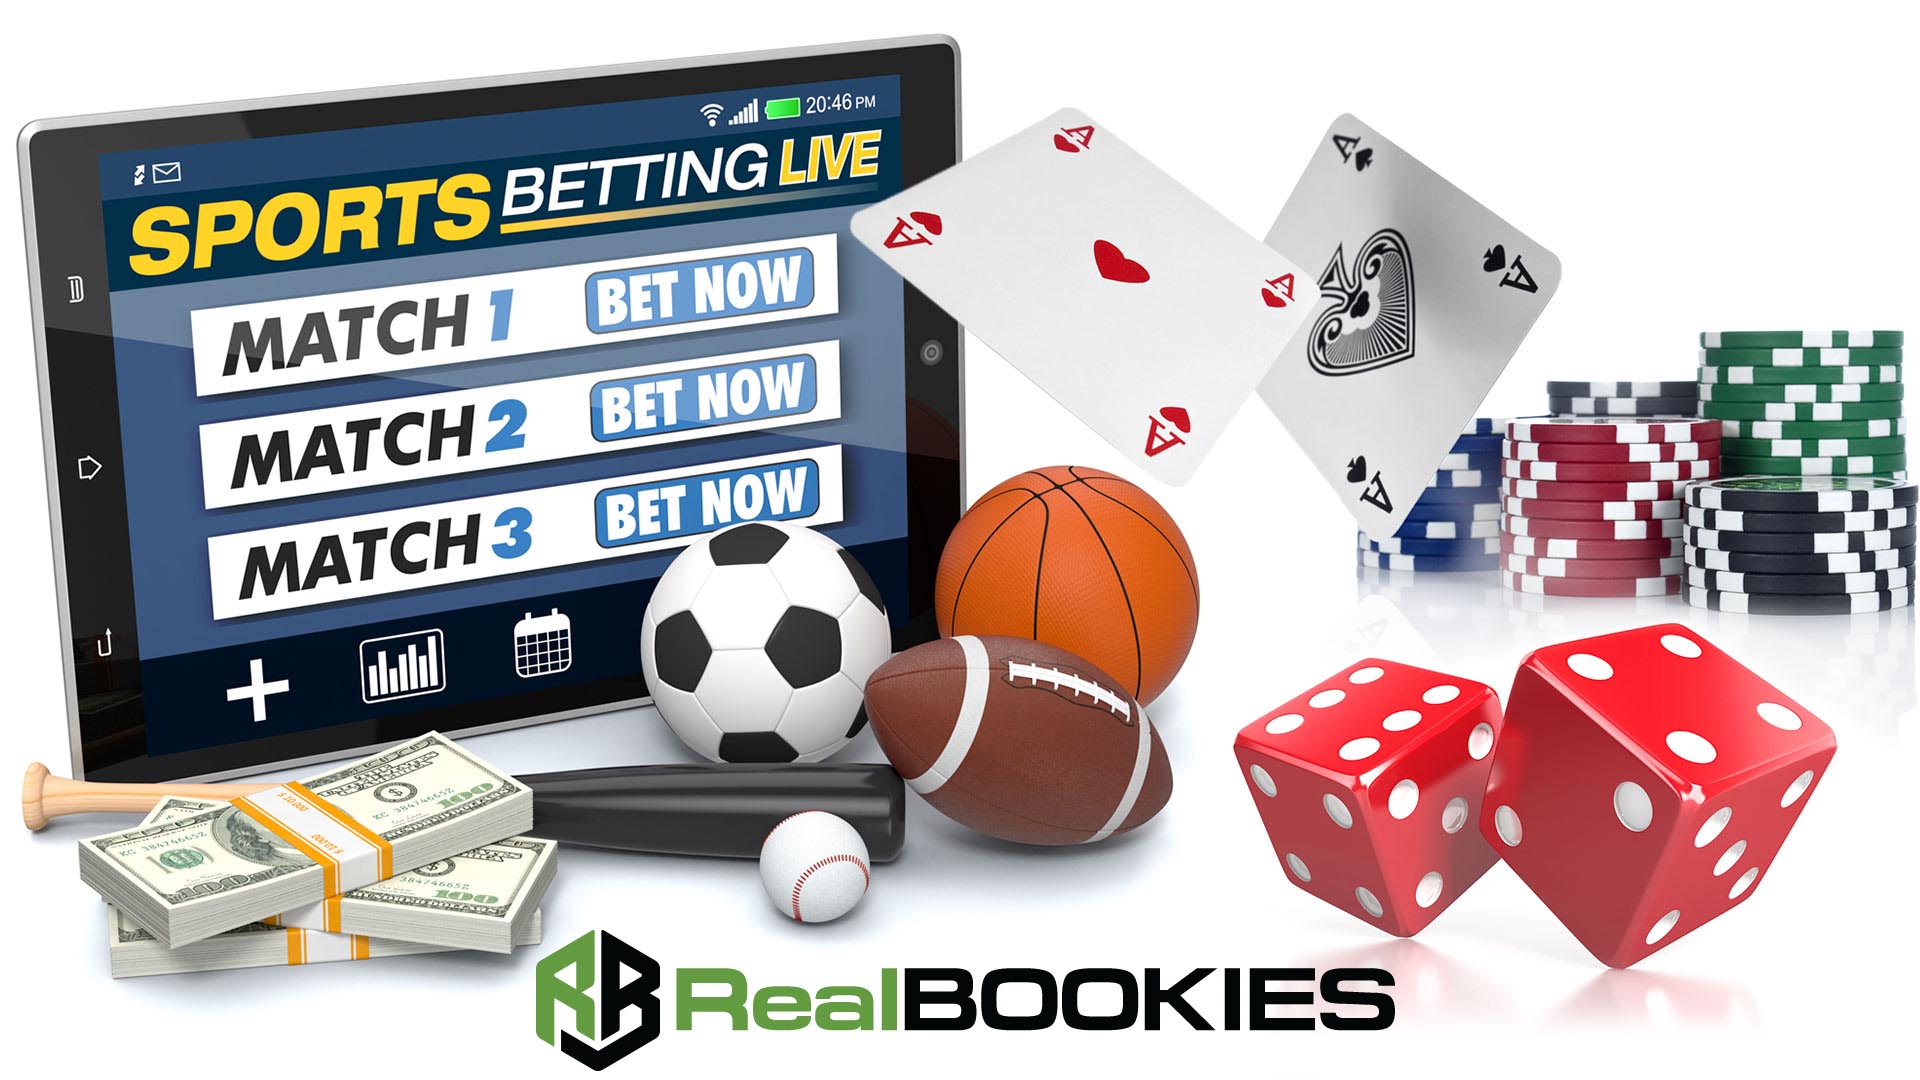 Live sports betting software for bookies final number of bitcoins in circulation